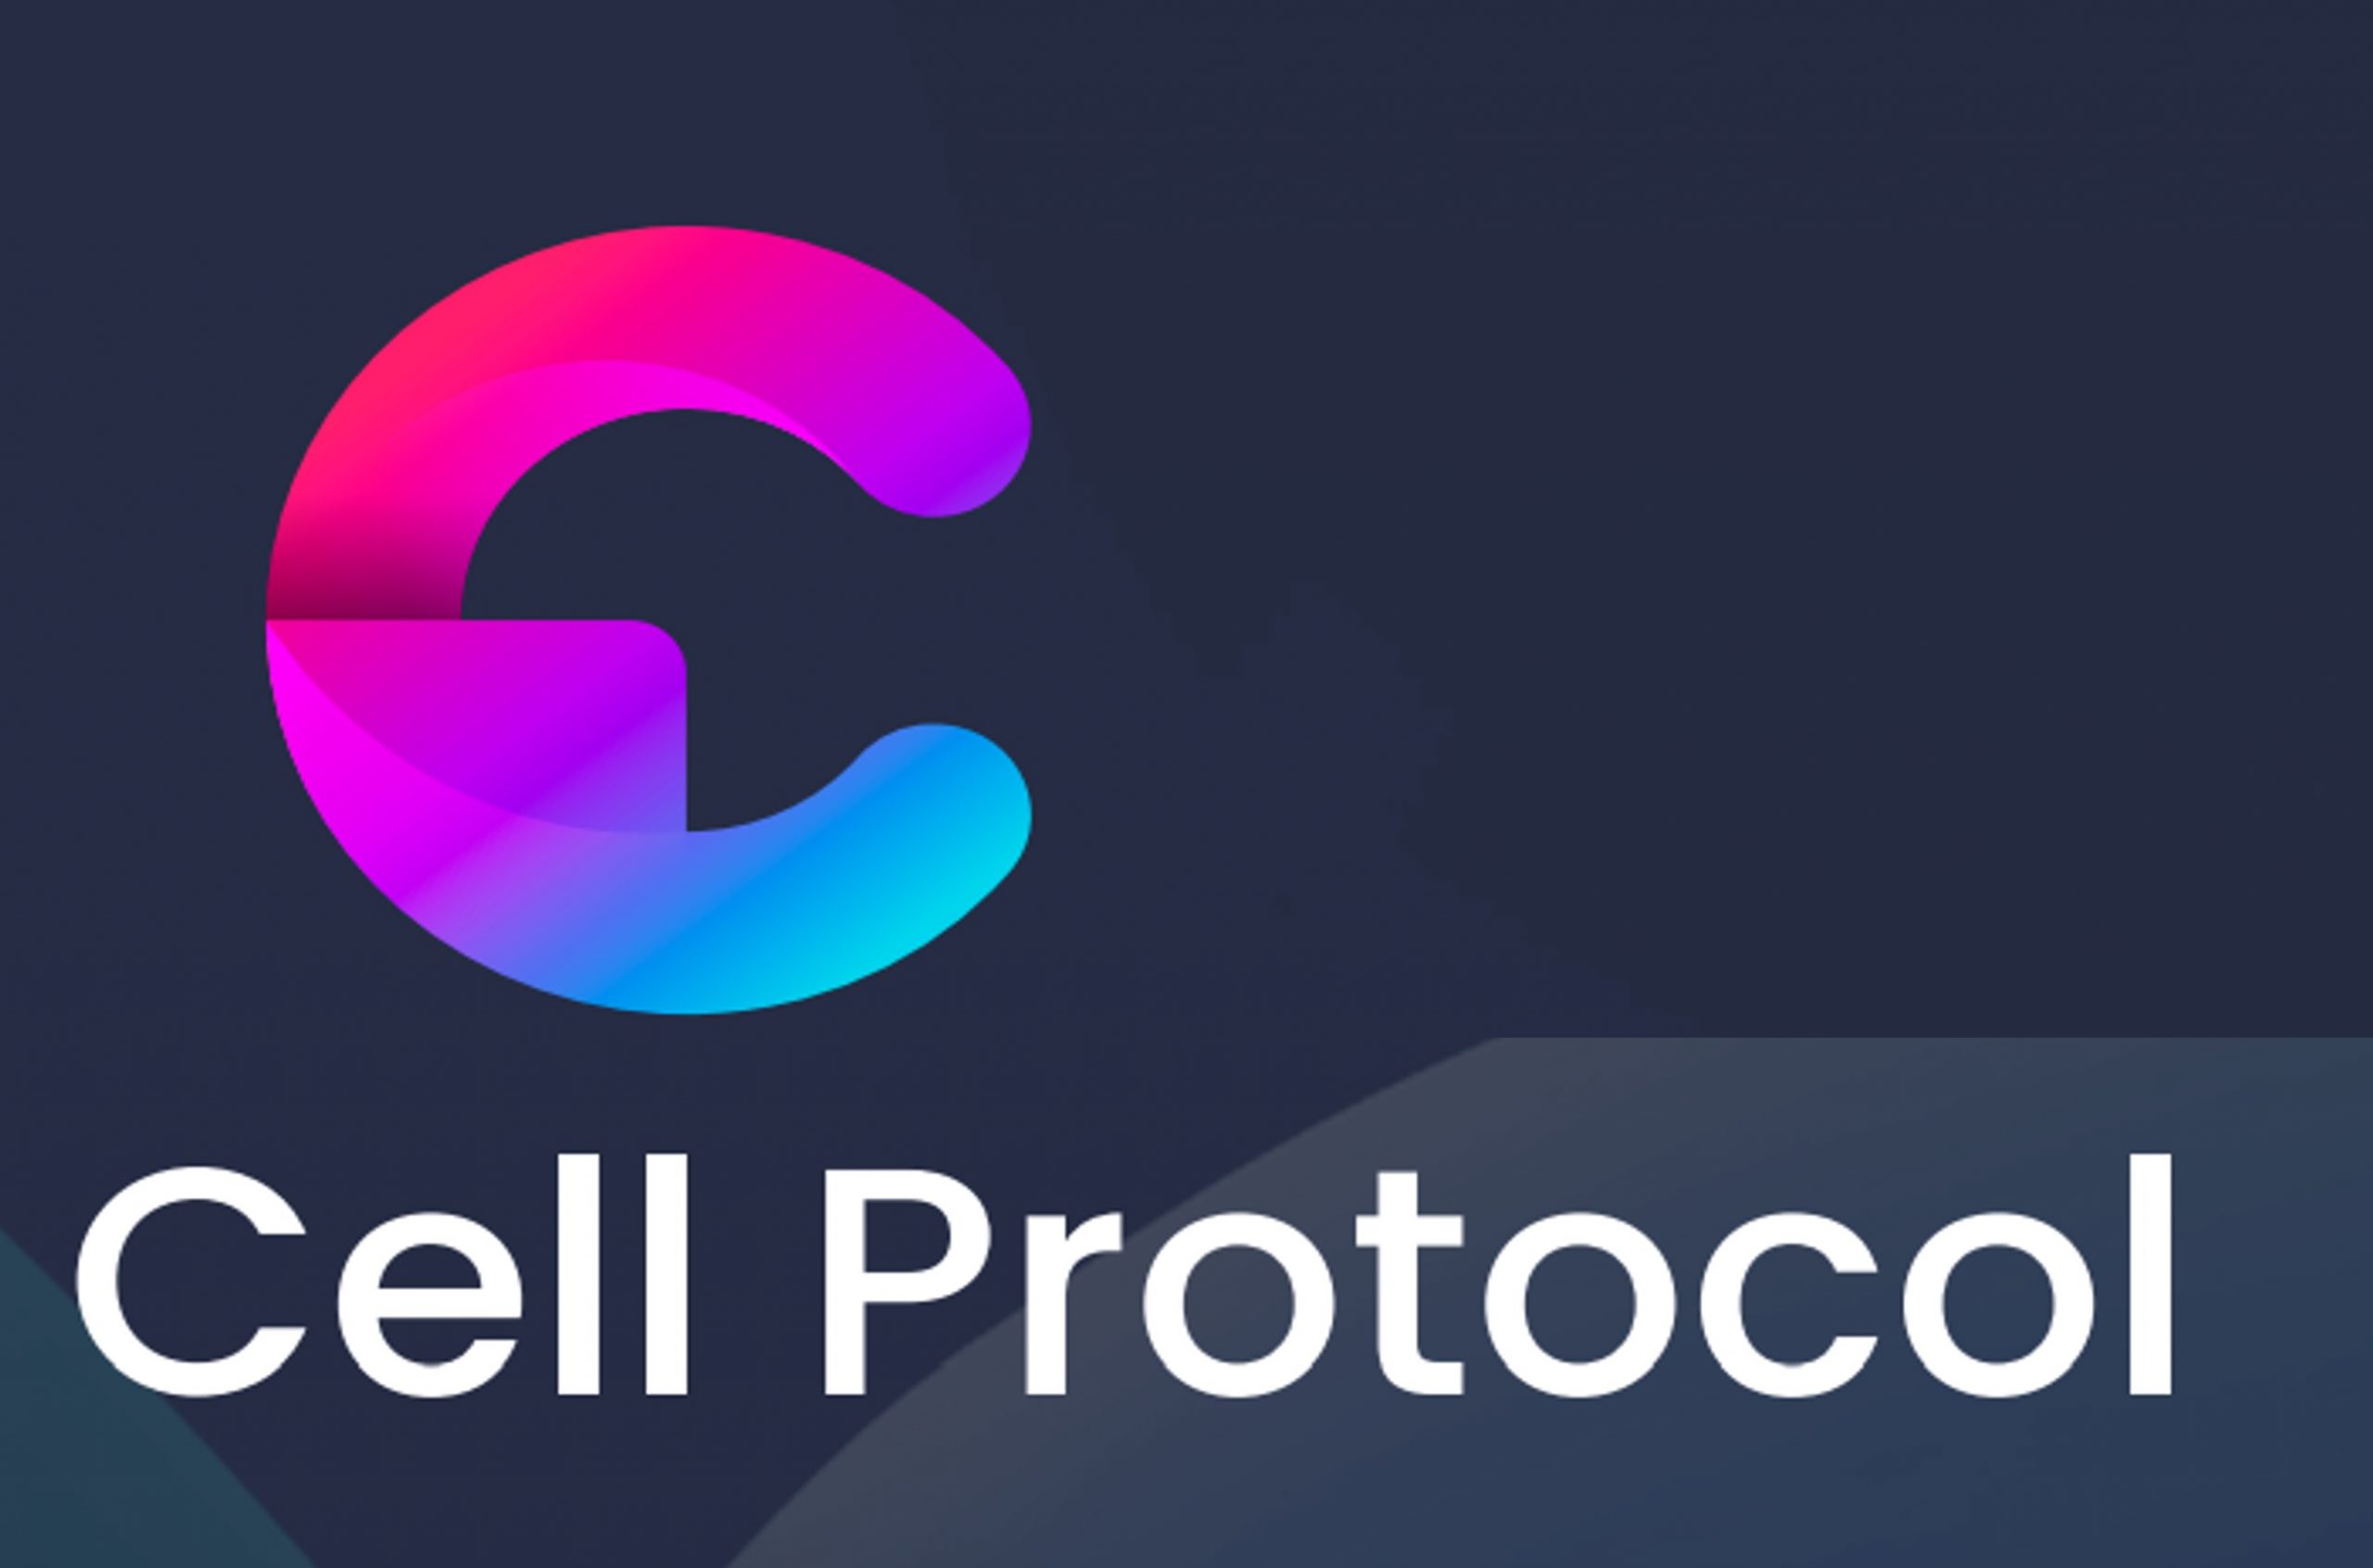 Cell Protocol